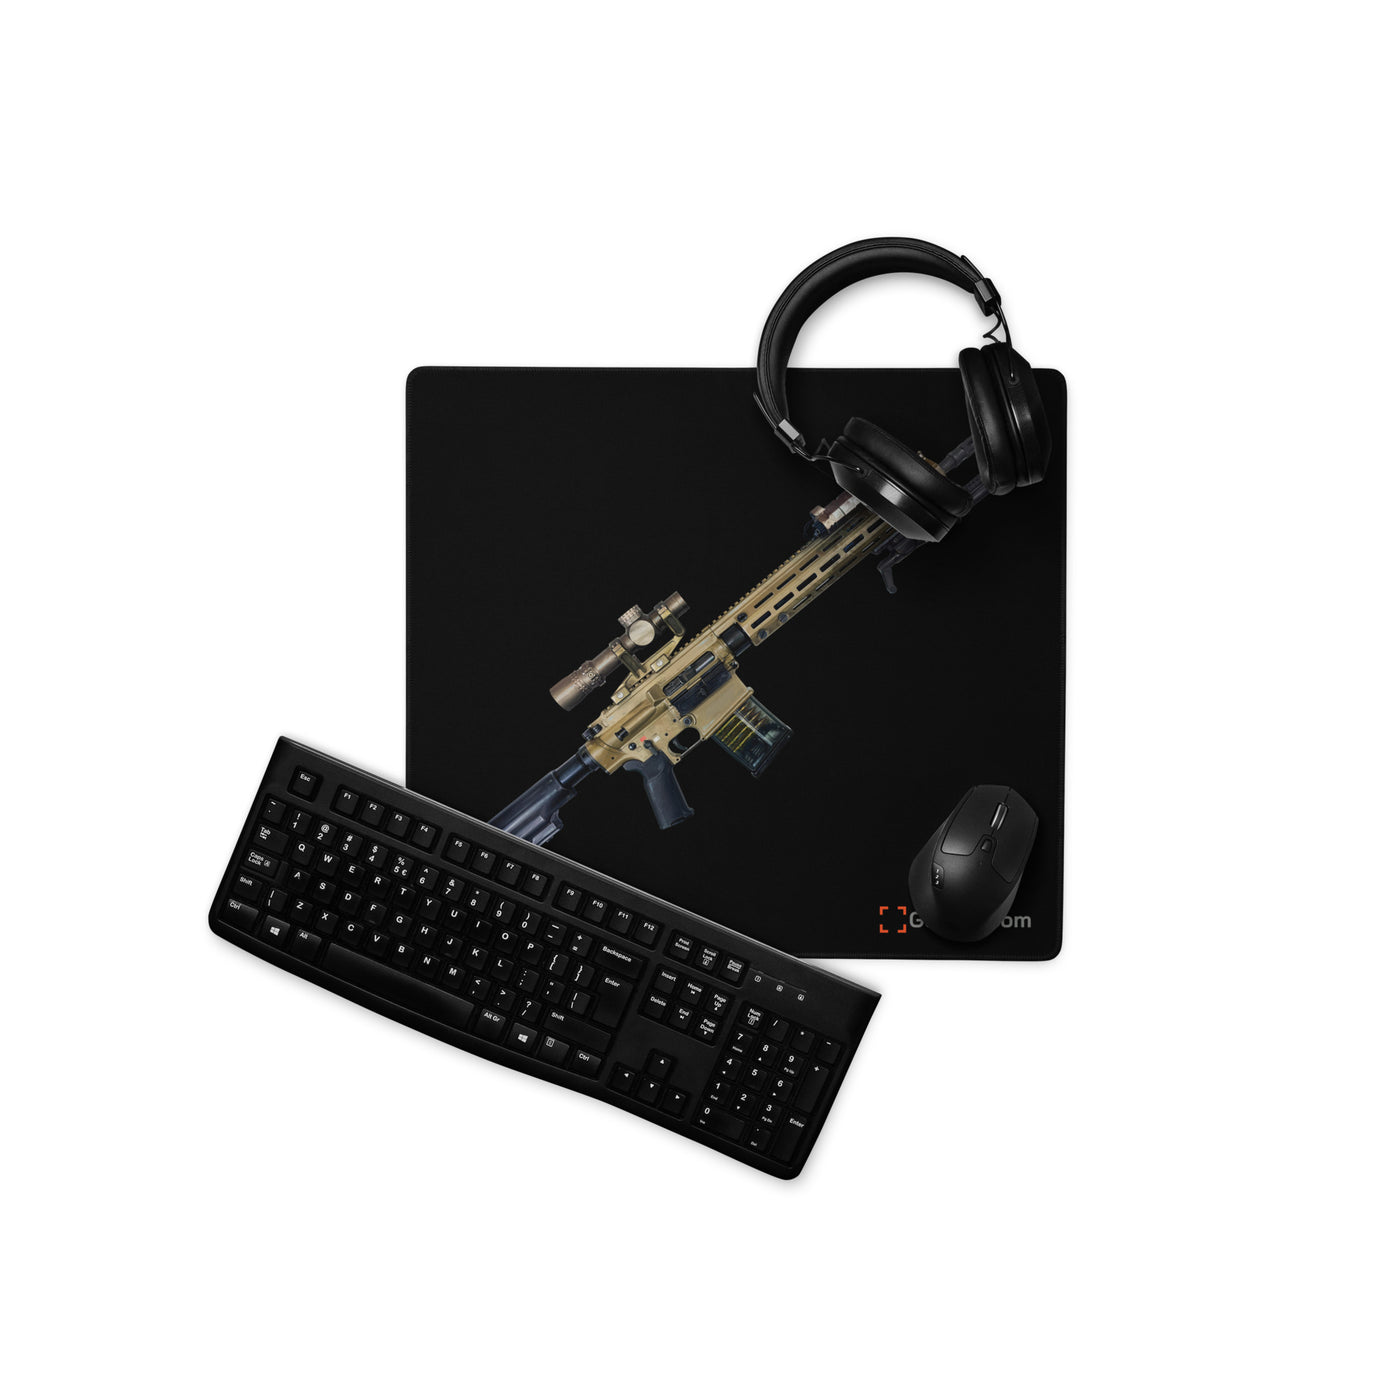 German 7.62x51mm AR10 Battle Rifle Gaming Mouse Pad - Just The Piece - Black Background